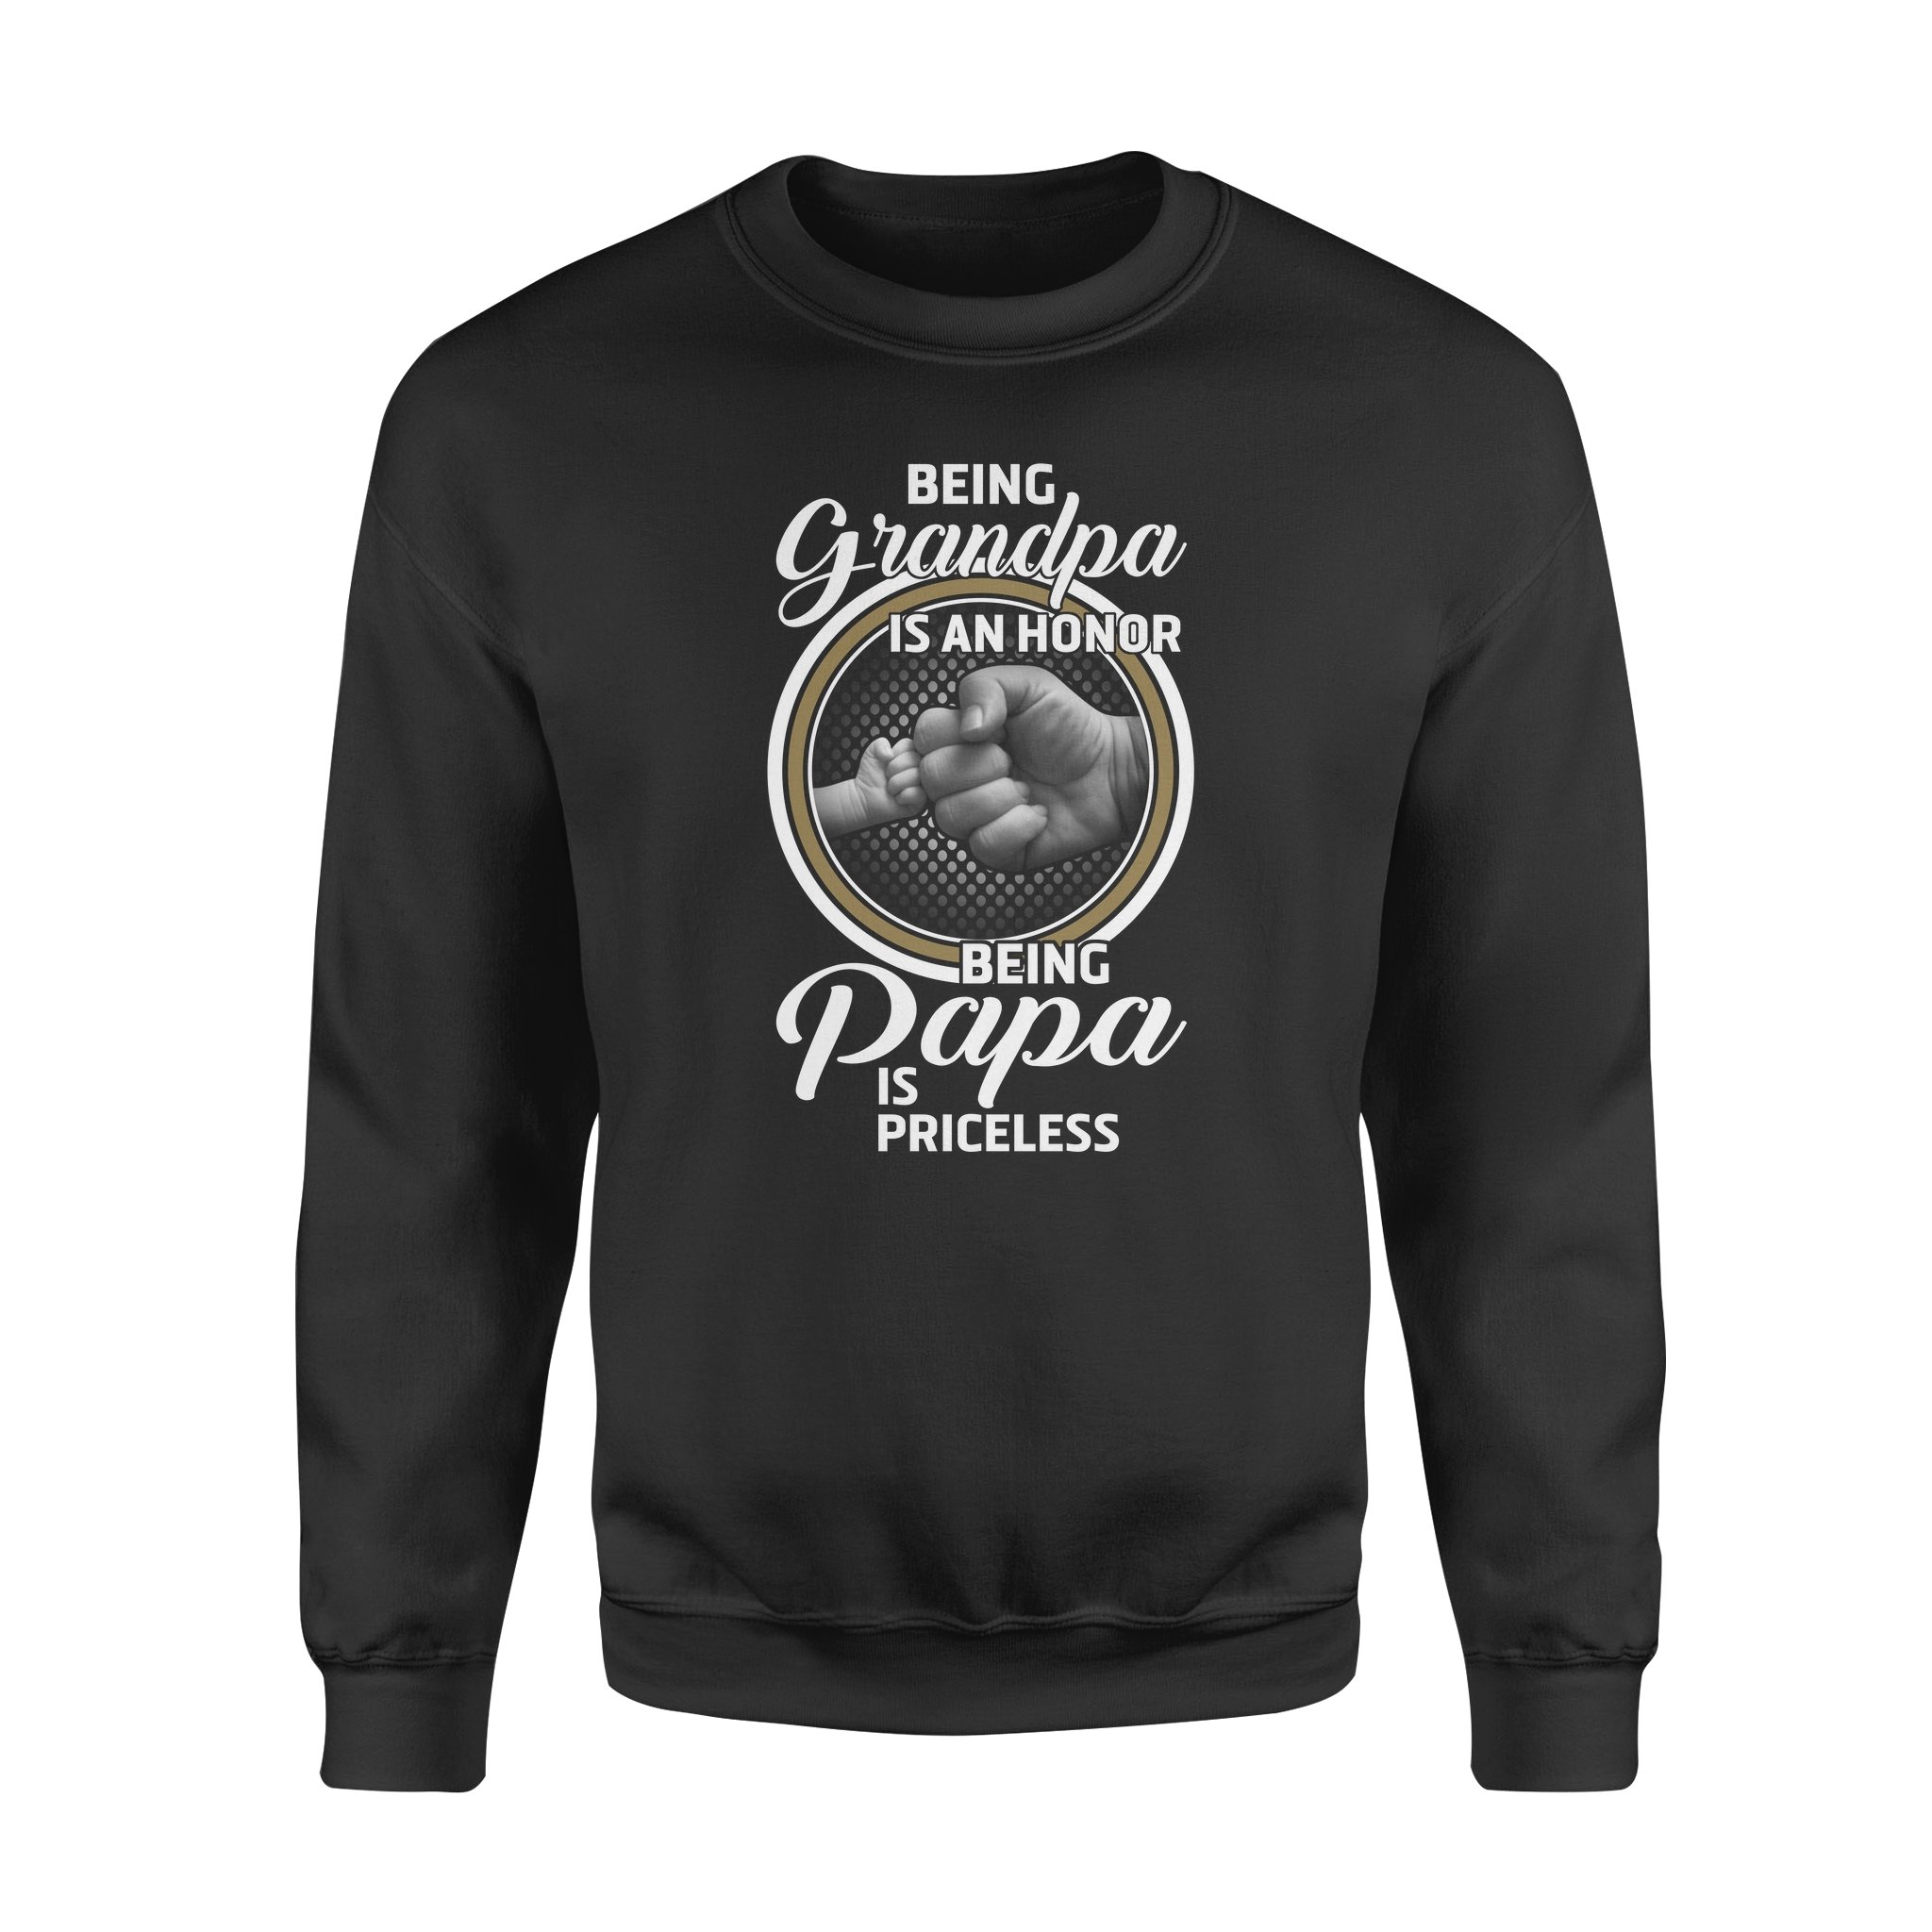 Being Grandpa Is An Honor Being Papa Is Priceless Graphic Tee Funny Shirt – Standard Crew Neck Sweatshirt